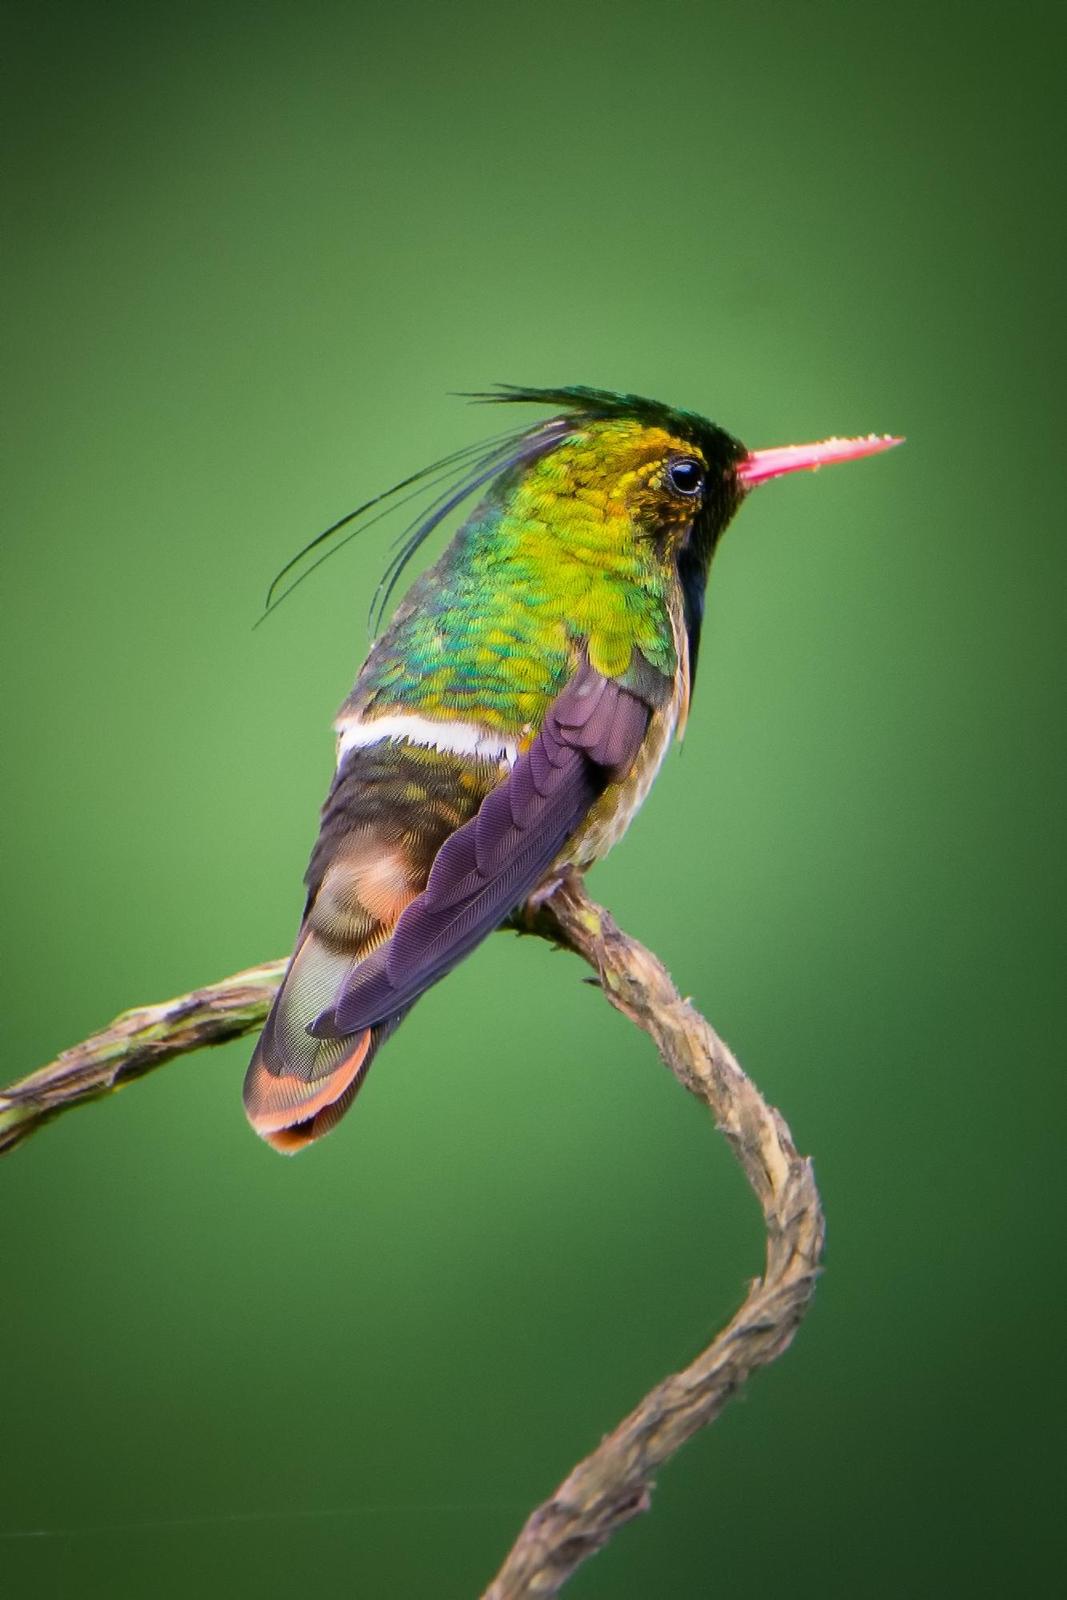 Black-crested Coquette Photo by Laurence Pellegrini